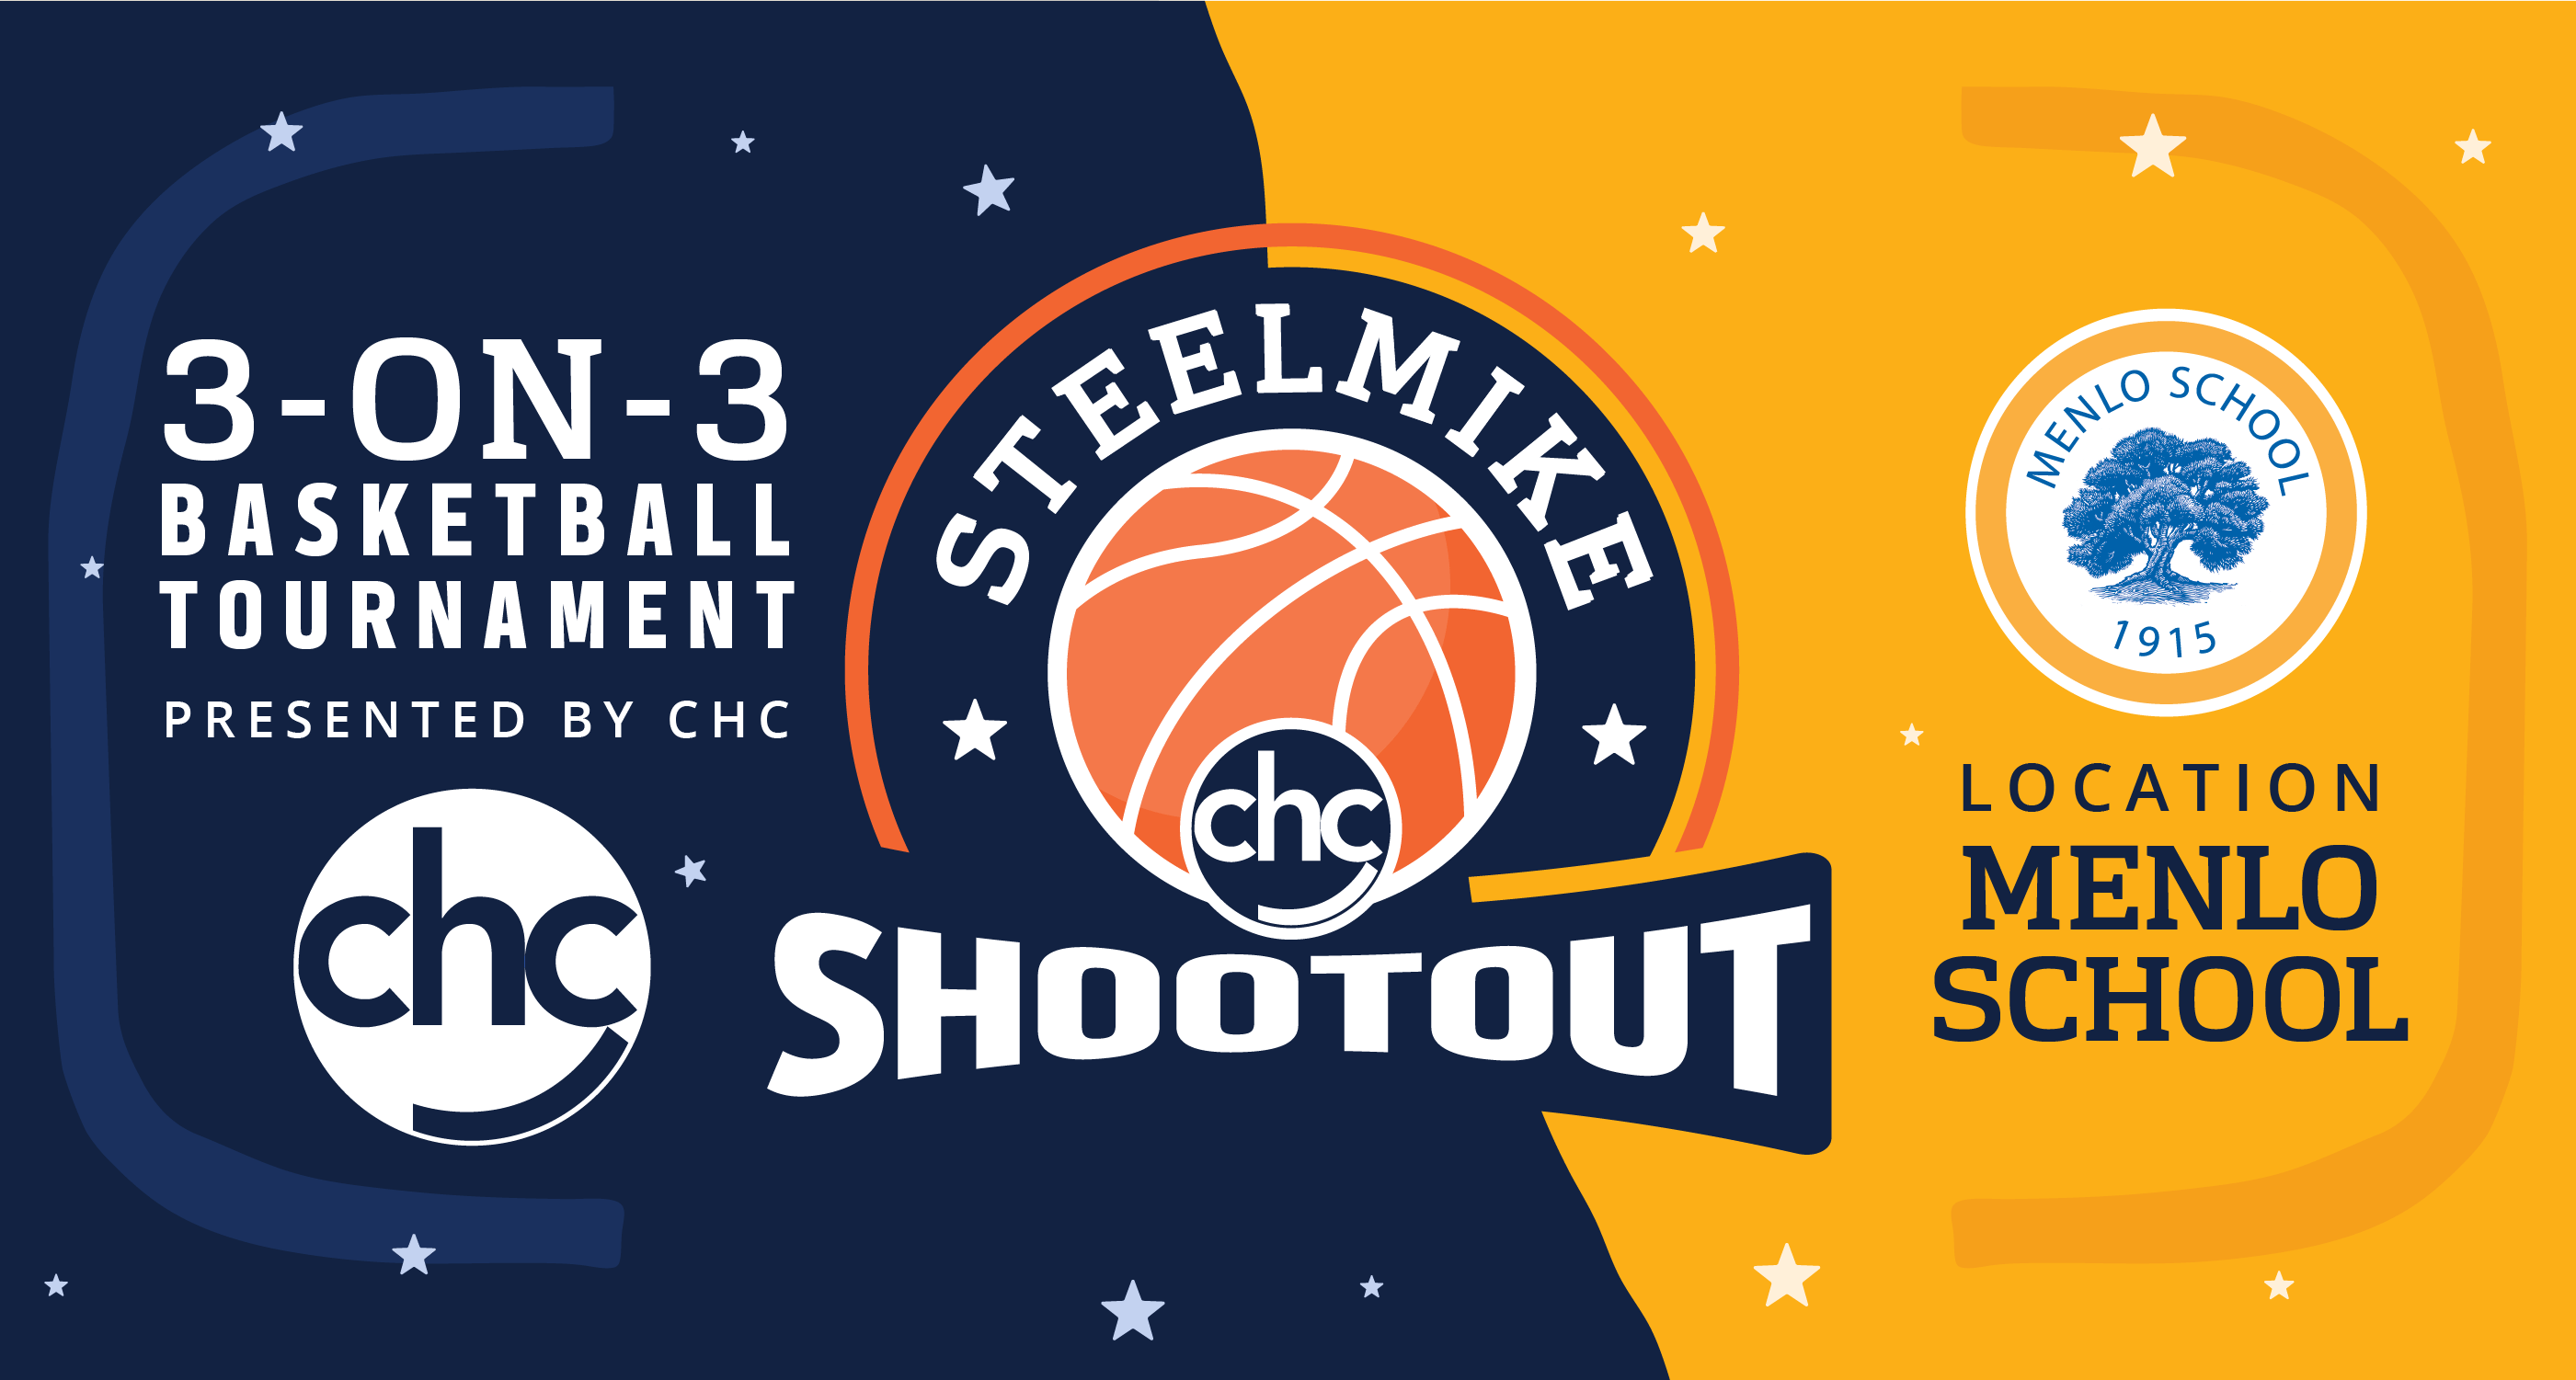 CHC SteelMike Shootout. 3-on-3 Basketball Tournament presented by CHC. Location: Menlo School.